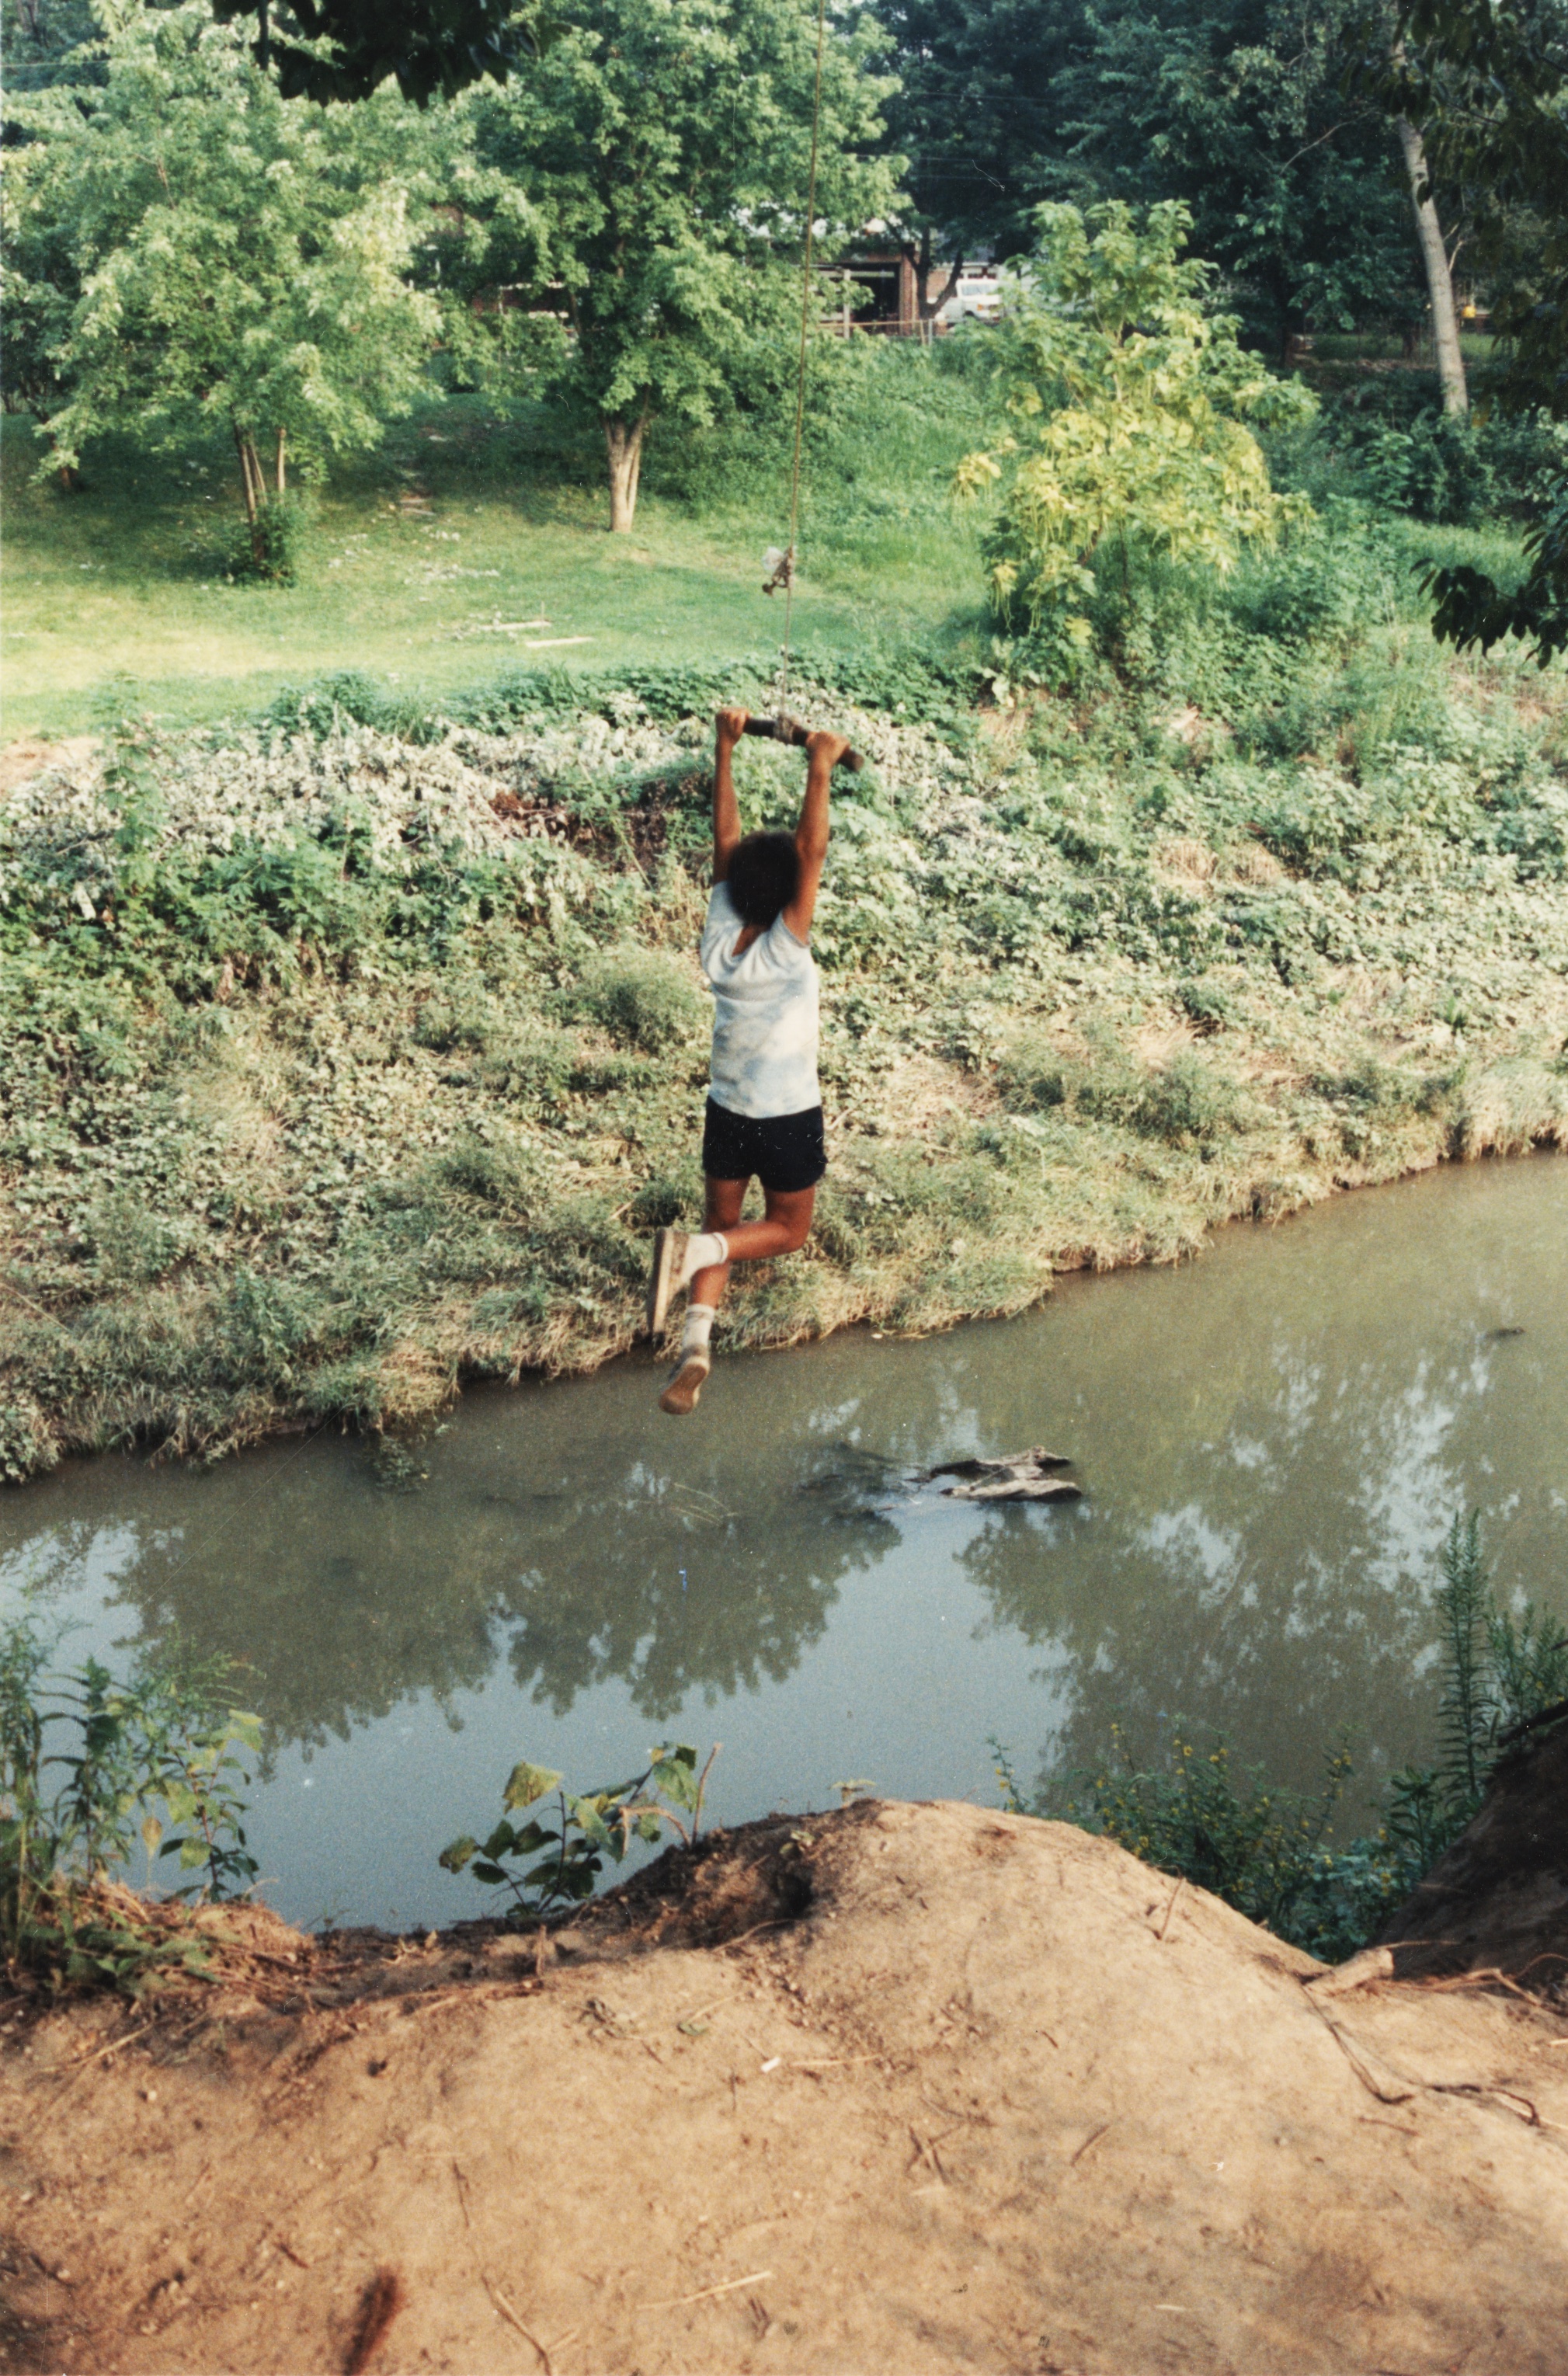 An undated photo from the 1980s, of a child swinging from a rope into Coldwater Creek. The photo is from a scrapbook kept by Sandy Delcoure, who lived on Willow Creek in Florissant and donated the scrapbook to the Kay Drey Mallinckrodt Collection. Only one of the photographs from the scrapbook includes any information, which read: “Willow Creek children on Cold Water [sic] Creek. We can’t keep the children away from the creek. The only alternative is to get it cleaned up.” (State Historical Society of Missouri, Kay Drey Mallinckrodt Collection, 1943-2006.)